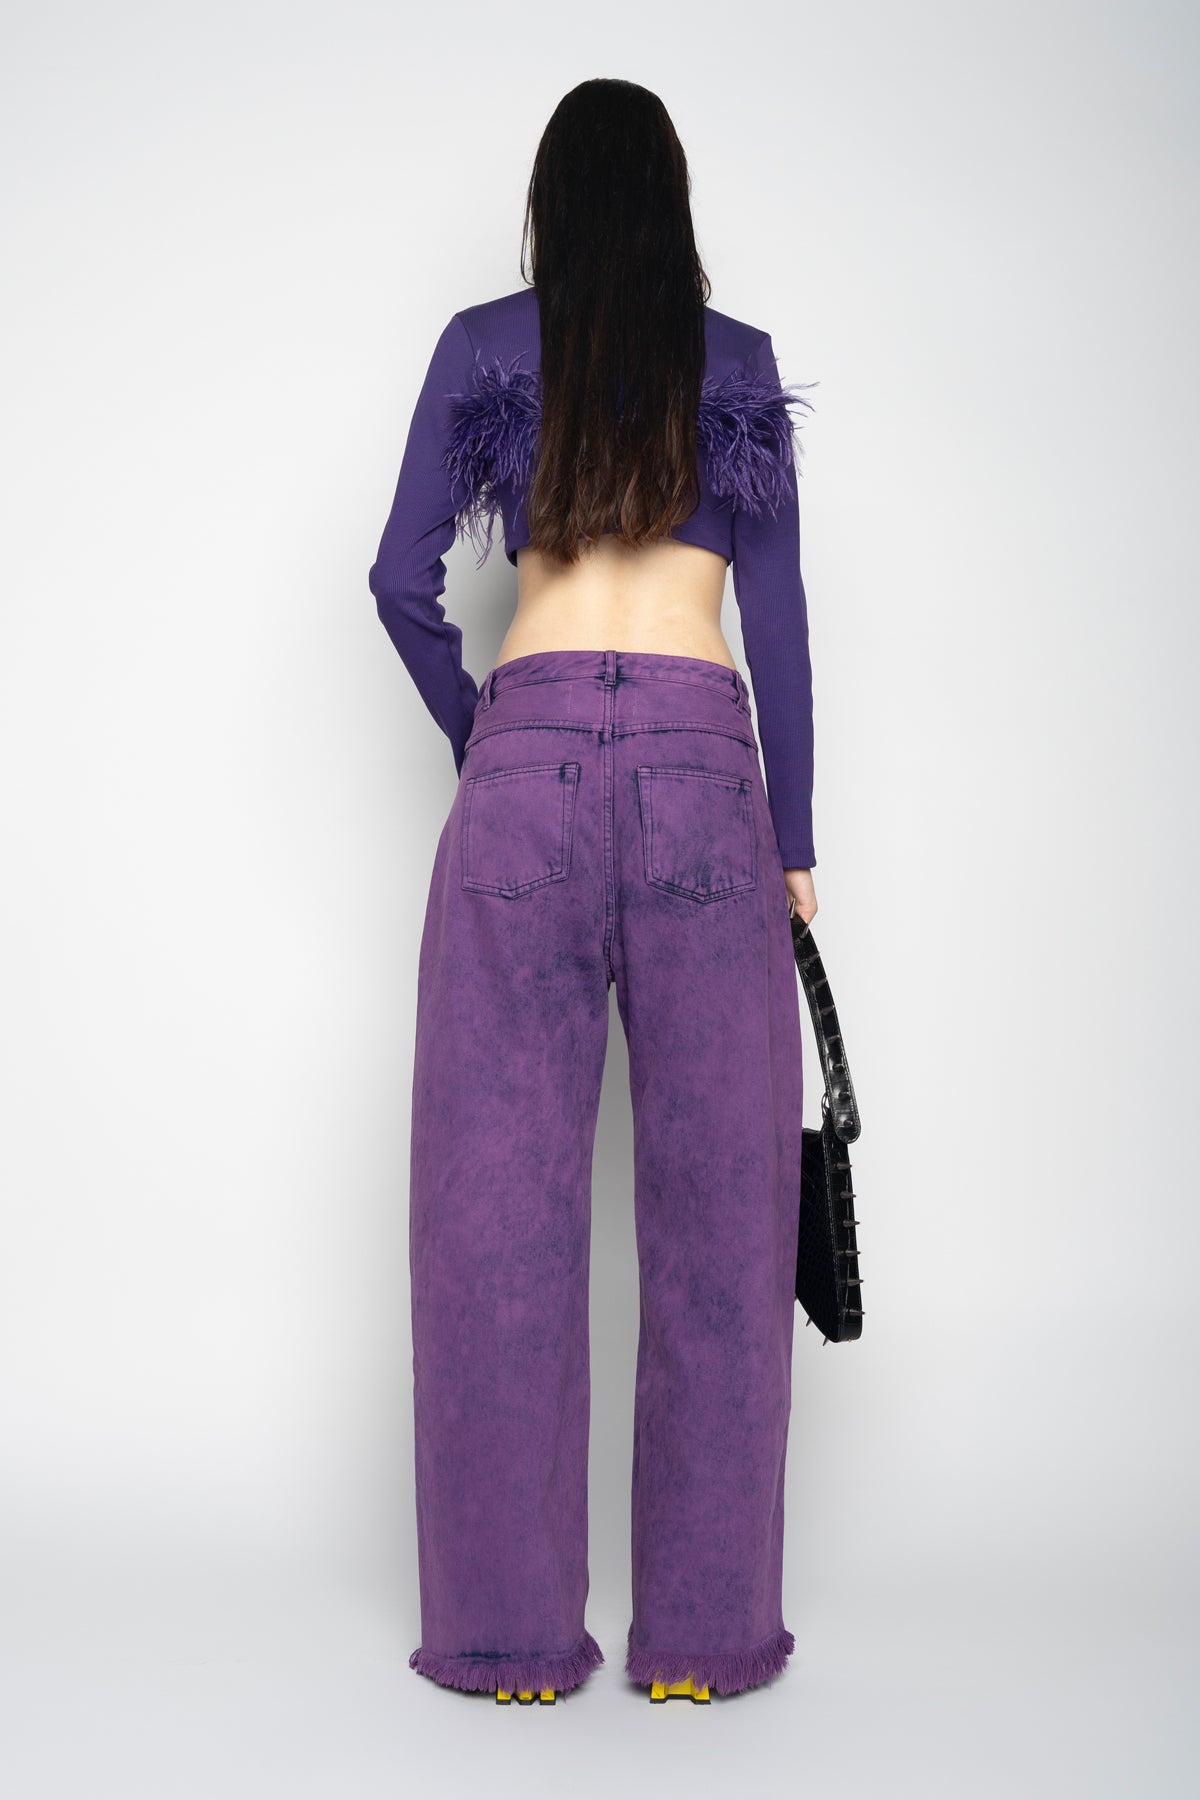 PURPLE CROPPED FEATHER TOP marques almeidaPURPLE CROPPED FEATHER TOP marques almeida